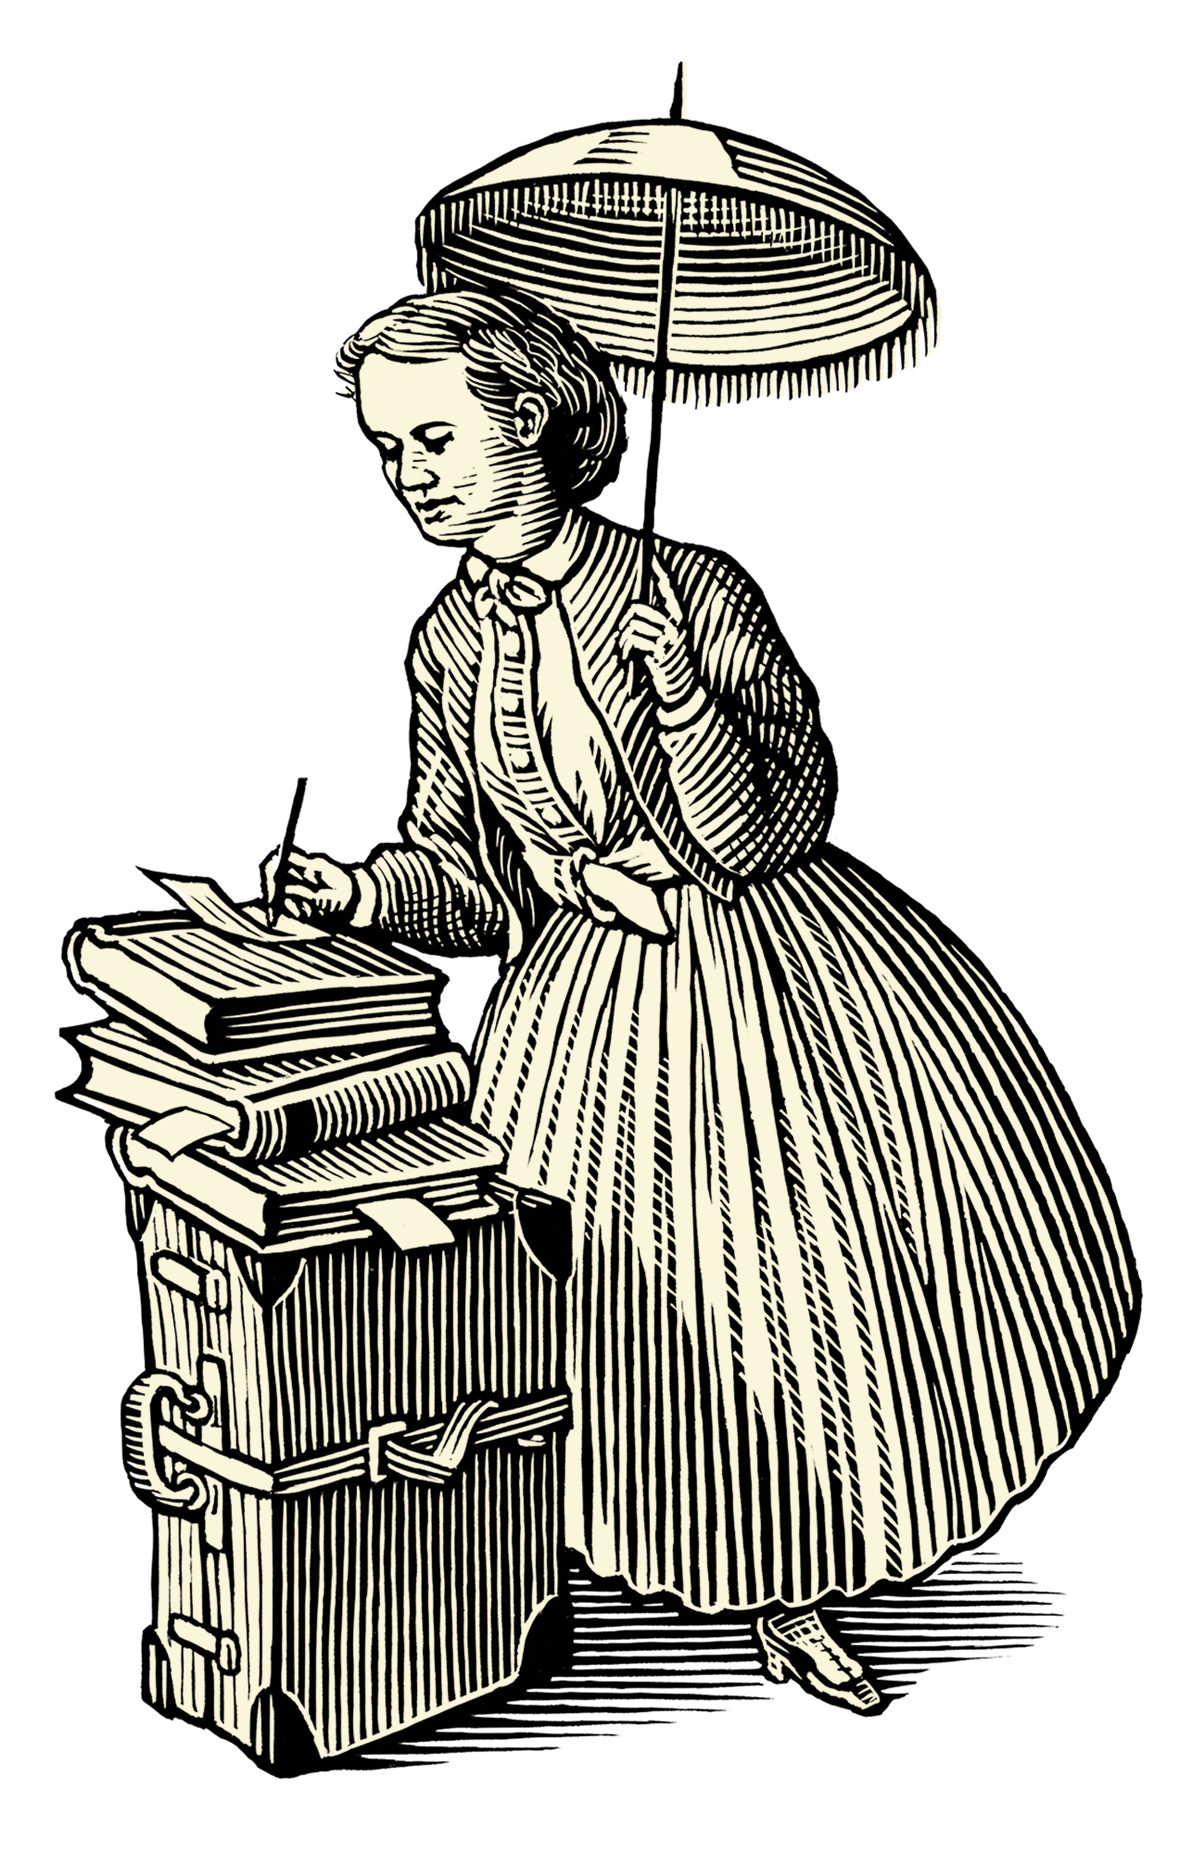 Black-and-white illustration of Charlotte Yonge, holding a parasol and balancing a stack of books on top of a travelling trunk